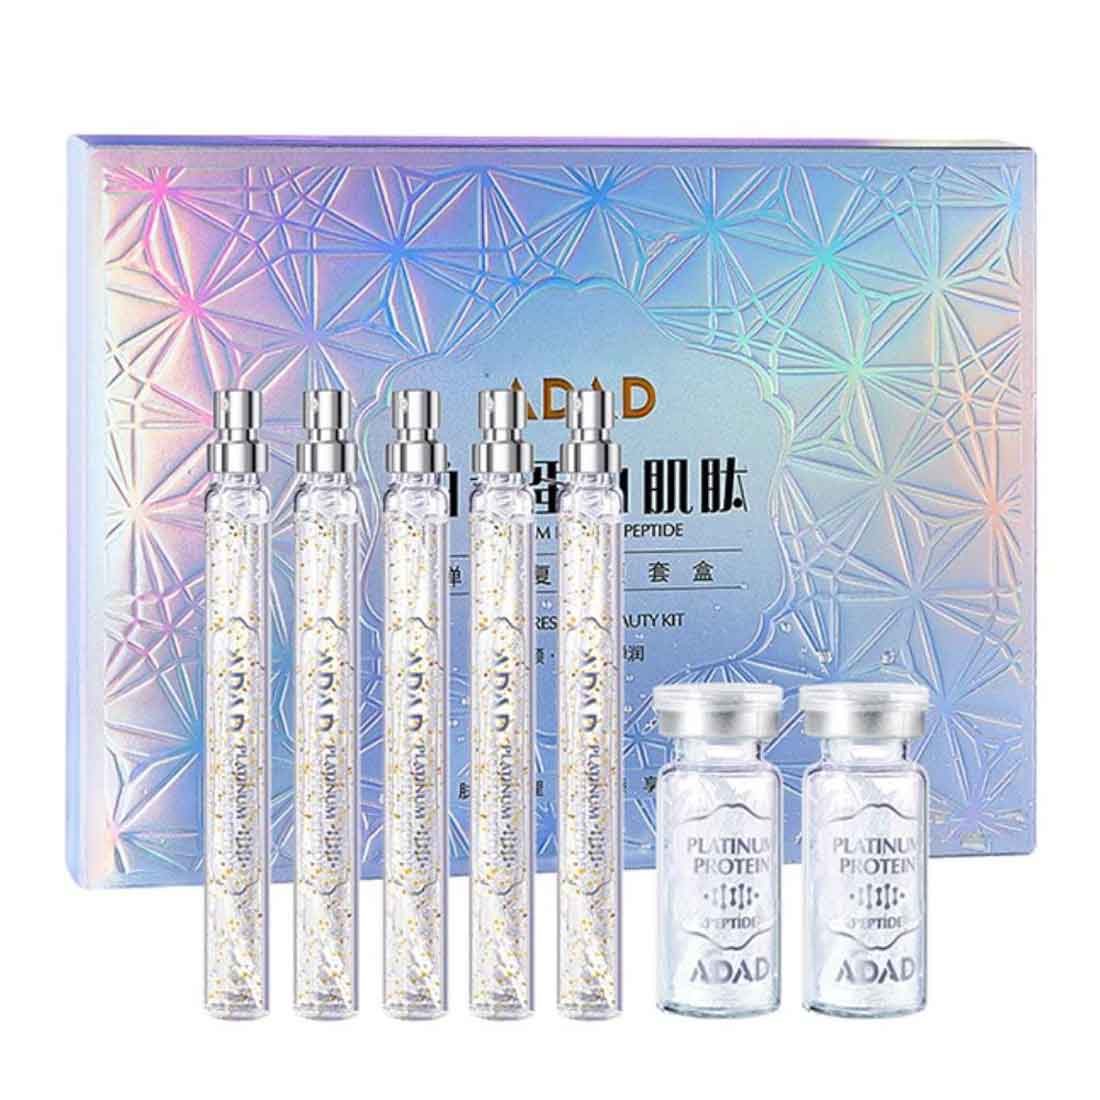 Serum-pack-and-absorbable-collagen-thread-without-the-need-for-injection-2